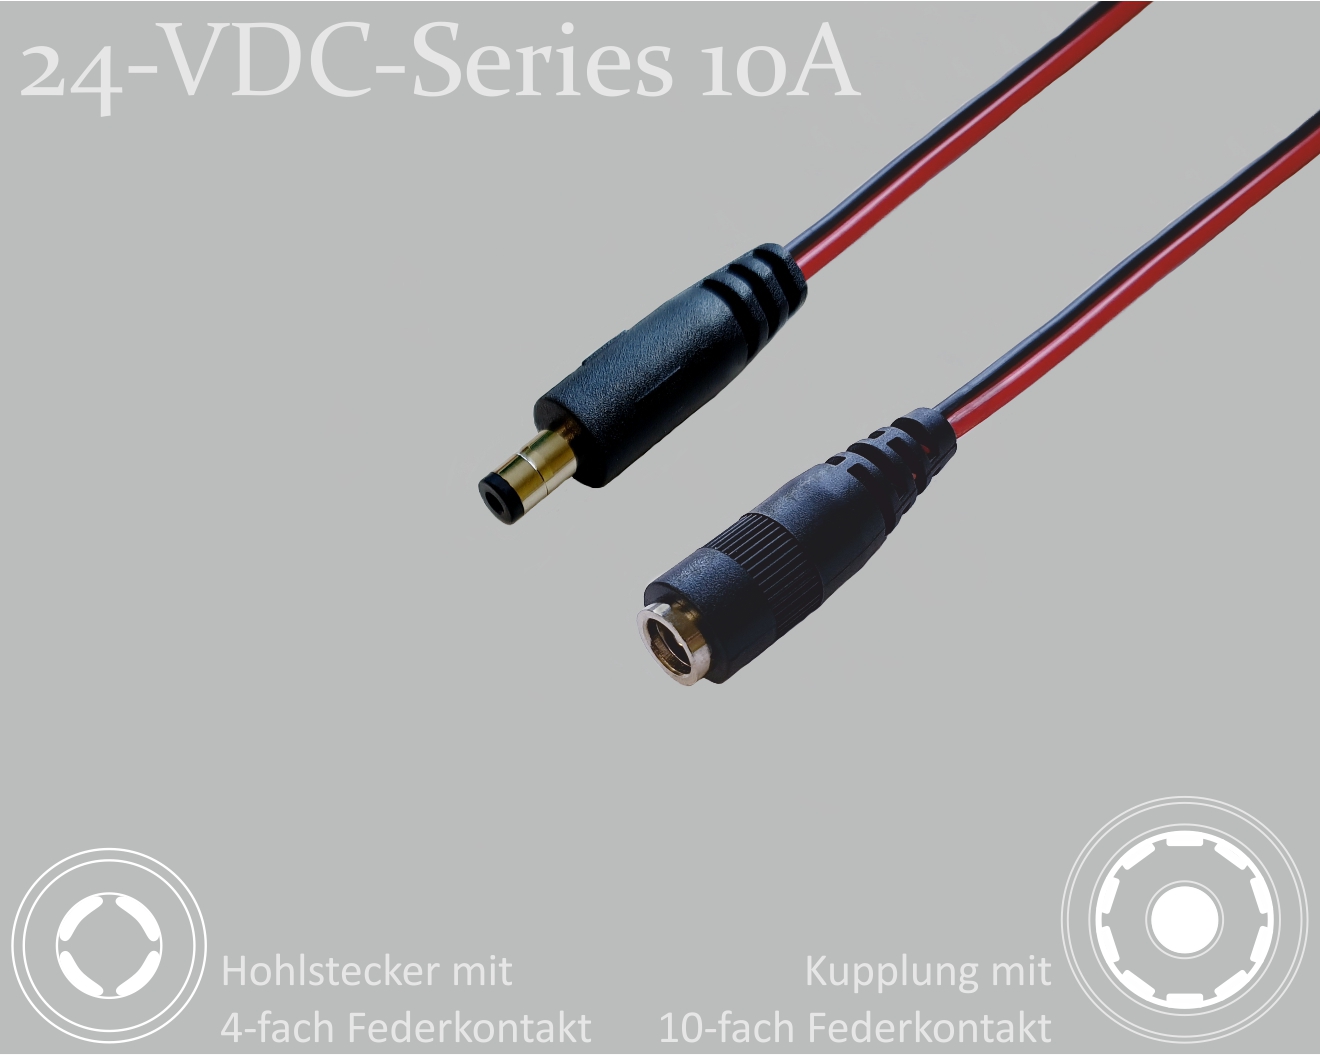 24-VDC-Series 10A, DC extension cable, DC male with 4-spring contact 2.1x5.5x9.5mm to DC female with 10-spring contact 2.1x5.5mm, flat cable 2x0.75mm², red/black, 4m